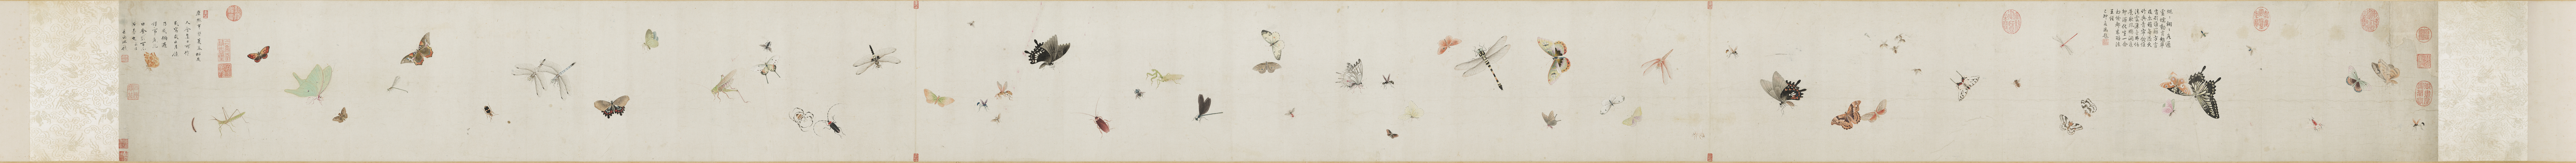 Qing Zhu Rulin Painting Grass and Insects